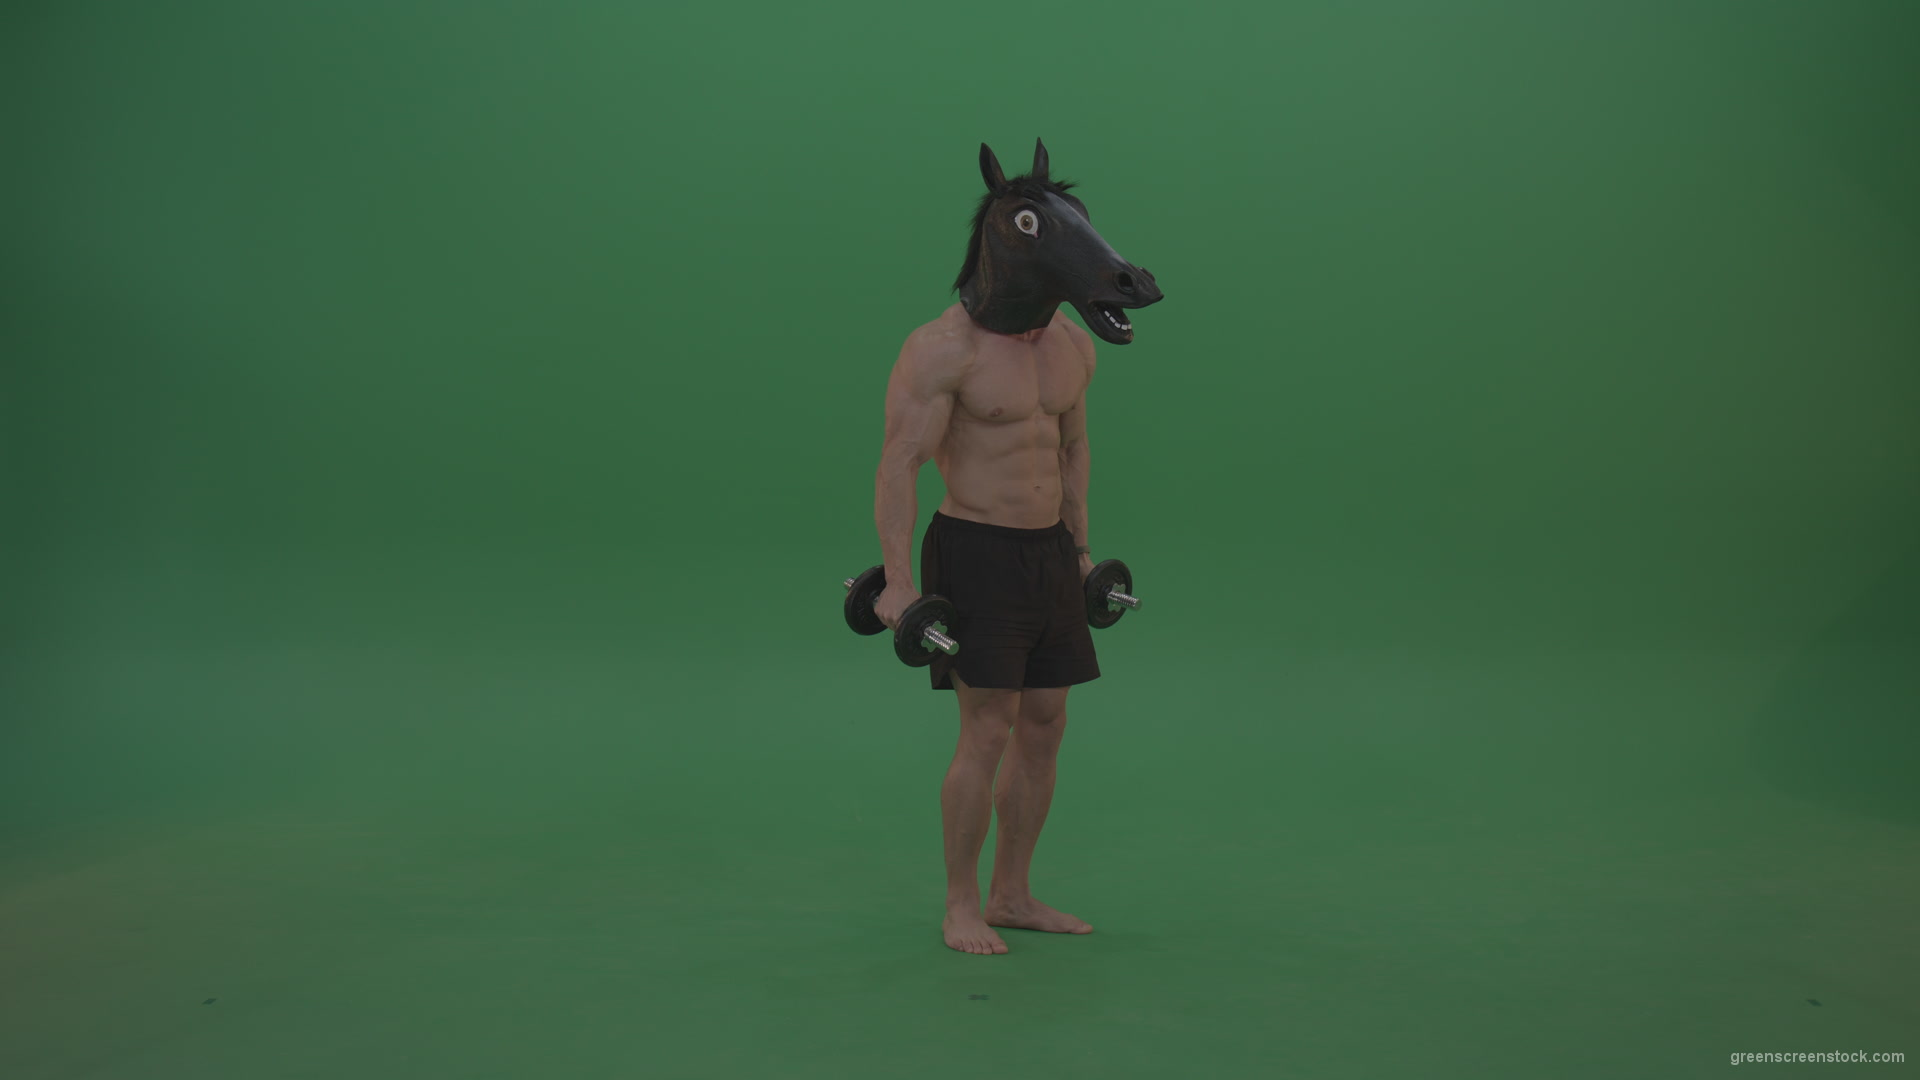 Ripped-man-with-horse-head-lifts-dumbells-over-chromakey-background_009 Green Screen Stock